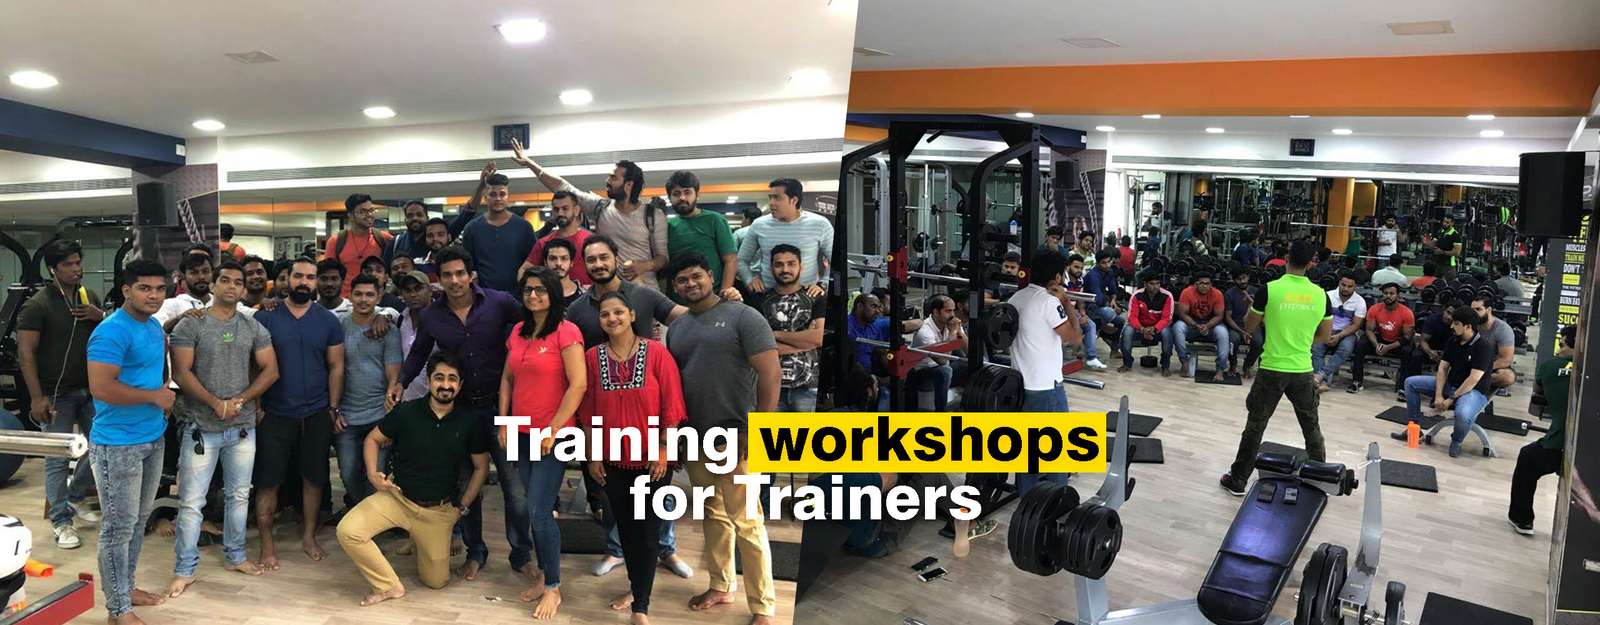 Training workshops for Trainers